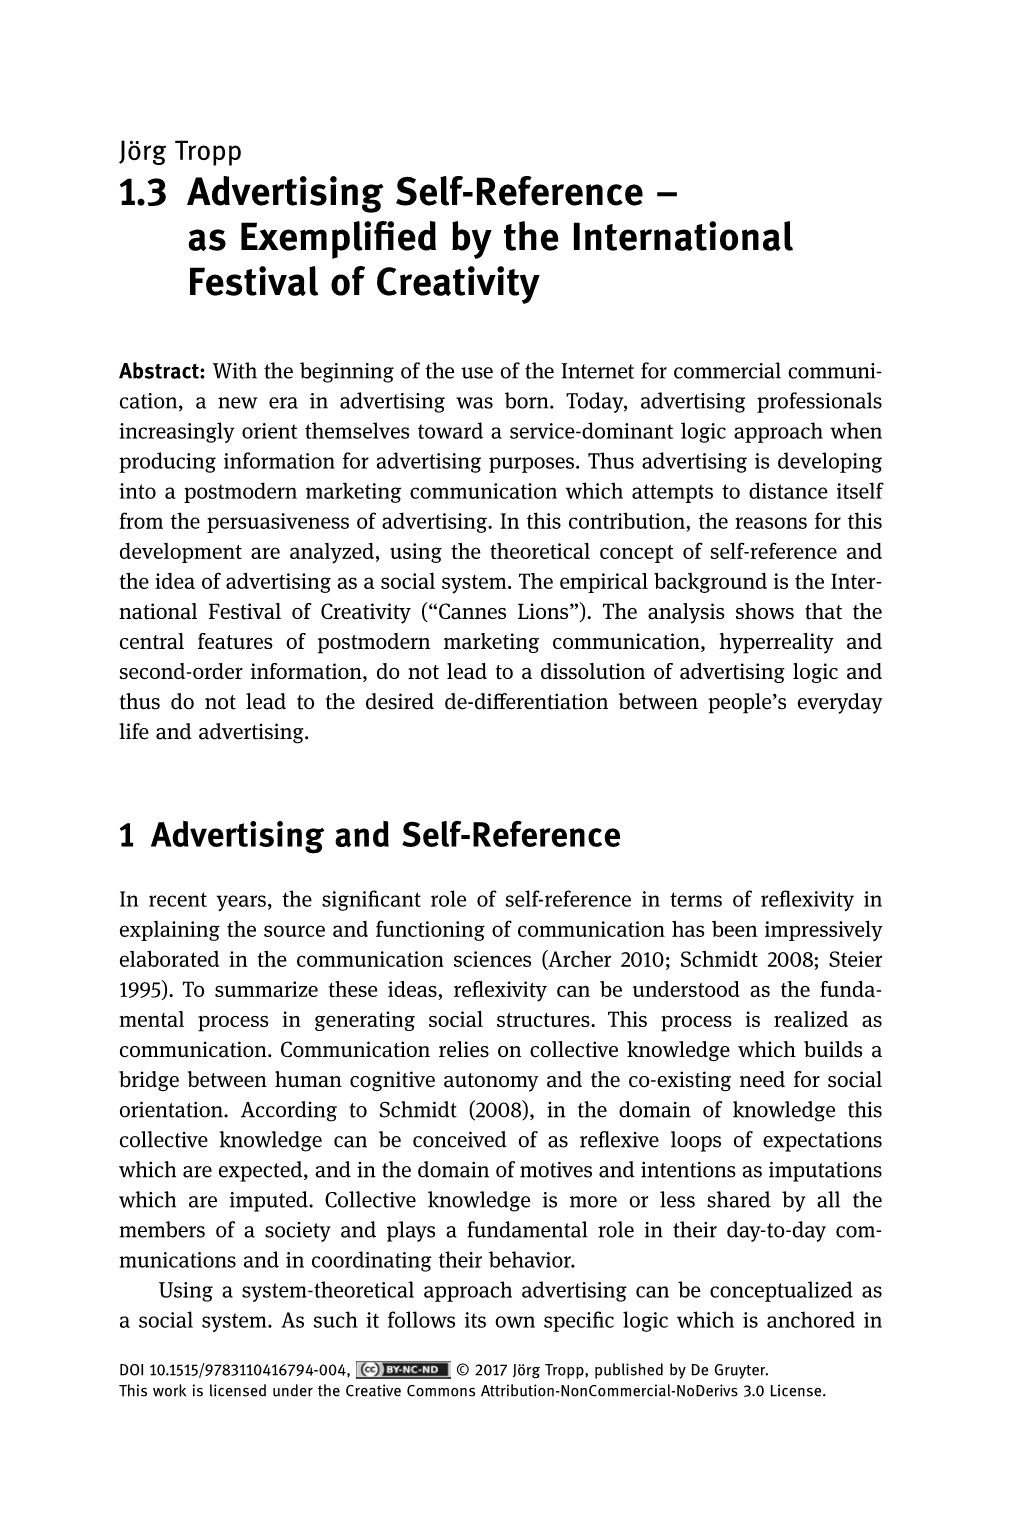 1.3 Advertising Self-Reference – As Exemplified by the International Festival of Creativity